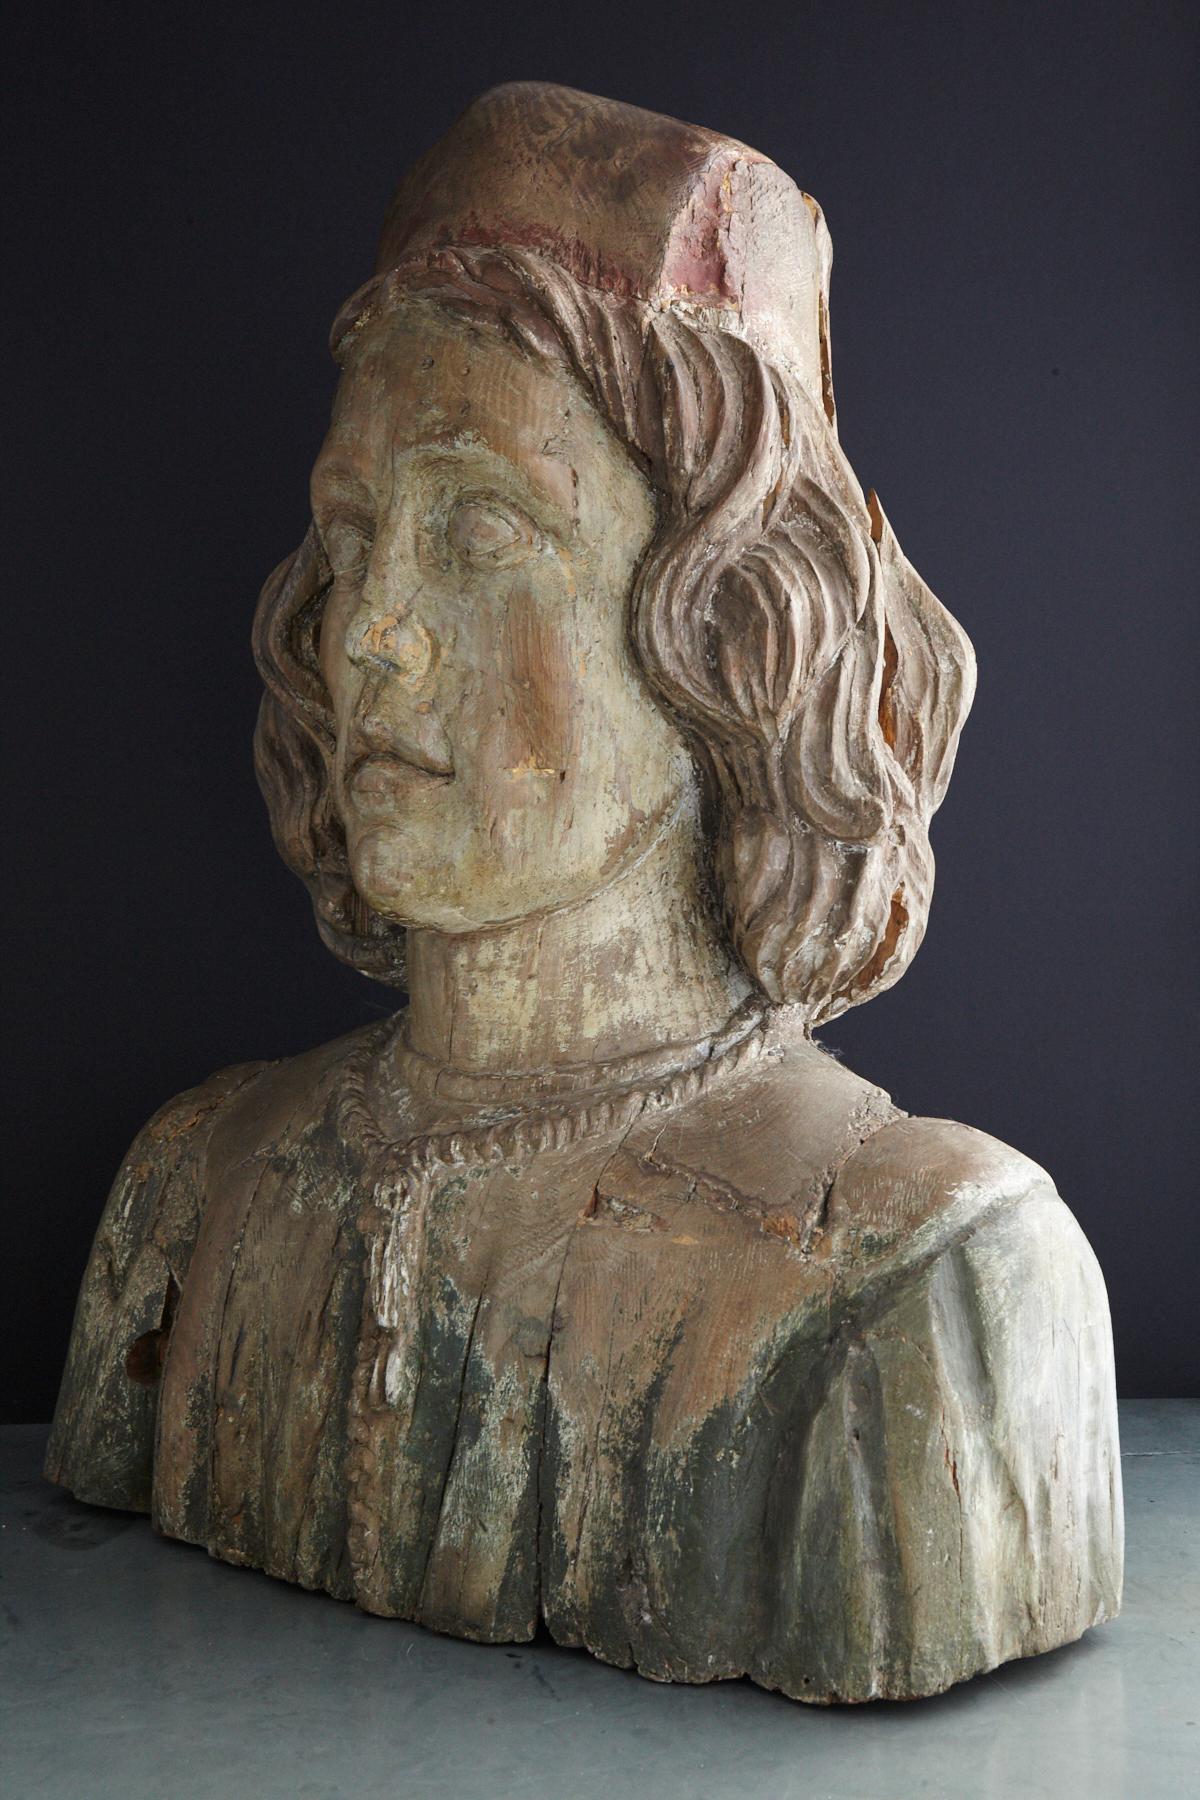 Early 19th Century English Carved Figurehead Depicting the Head of a Merchant 14